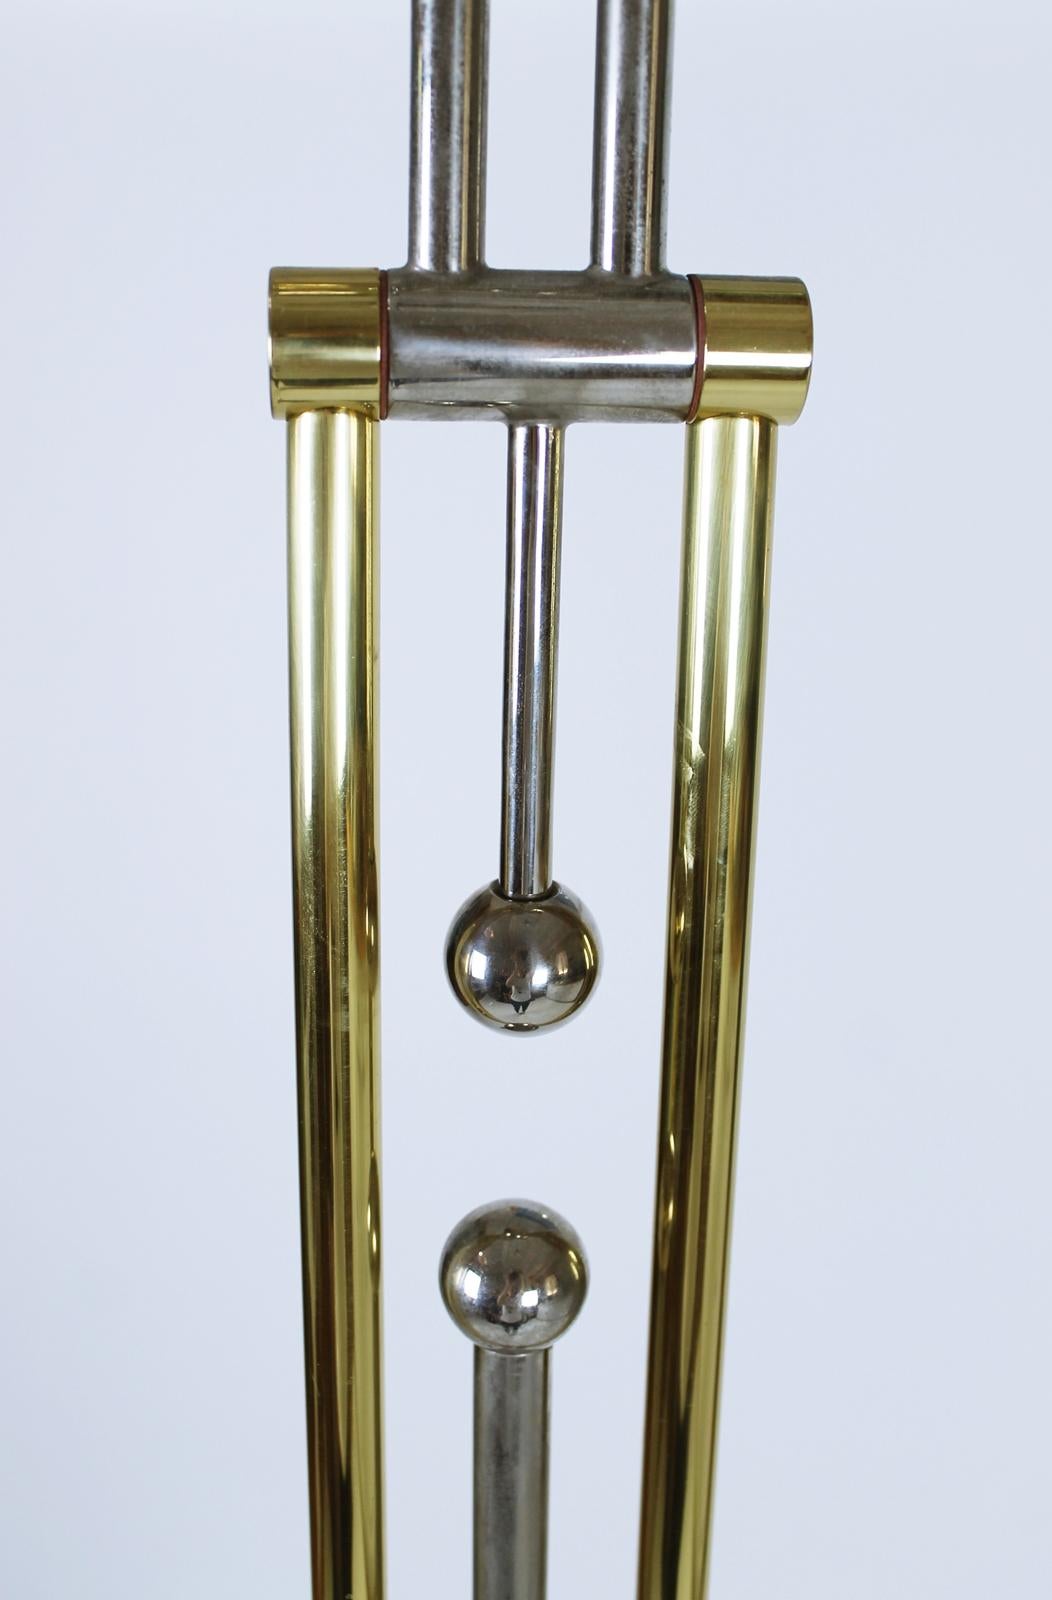 Goetz Chrome and Brass Adjustable Halogen Floor Lamp with Dimmer, Germany, 1970 For Sale 3